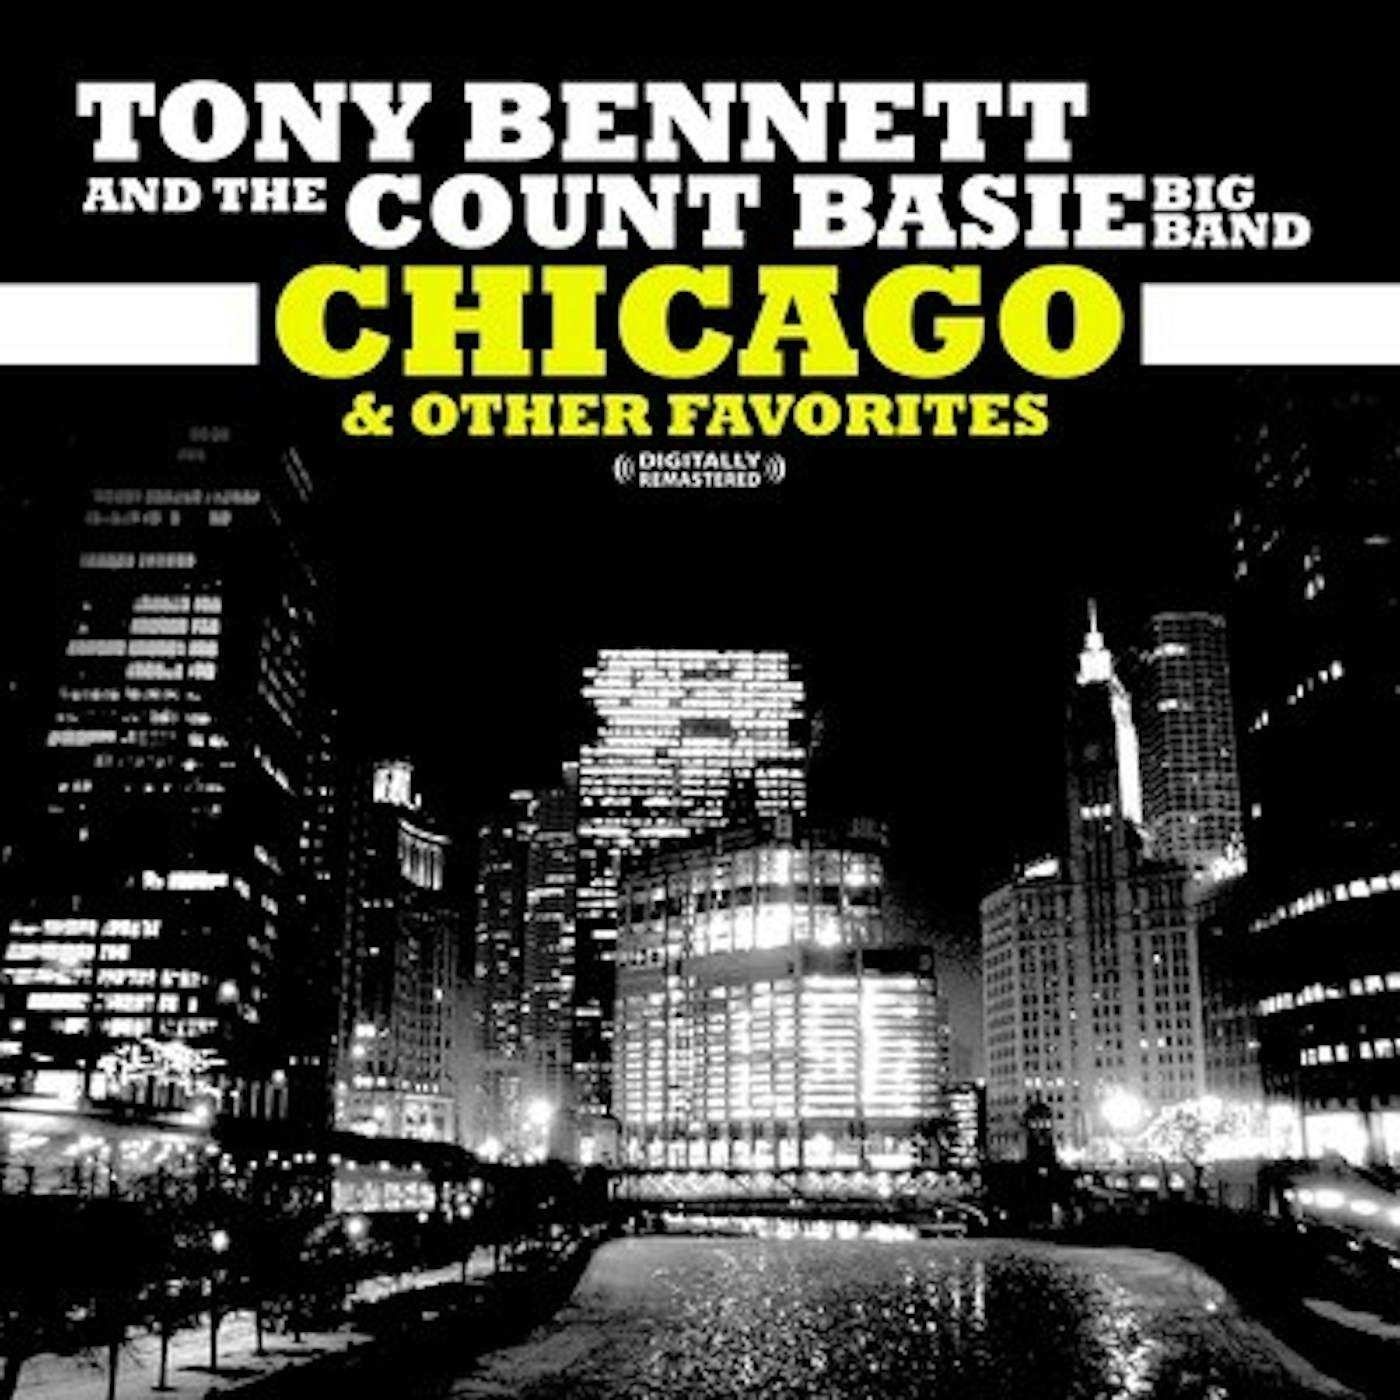 Tony Bennett & The Count Basie Orchestra CHICAGO & OTHER FAVORITES CD